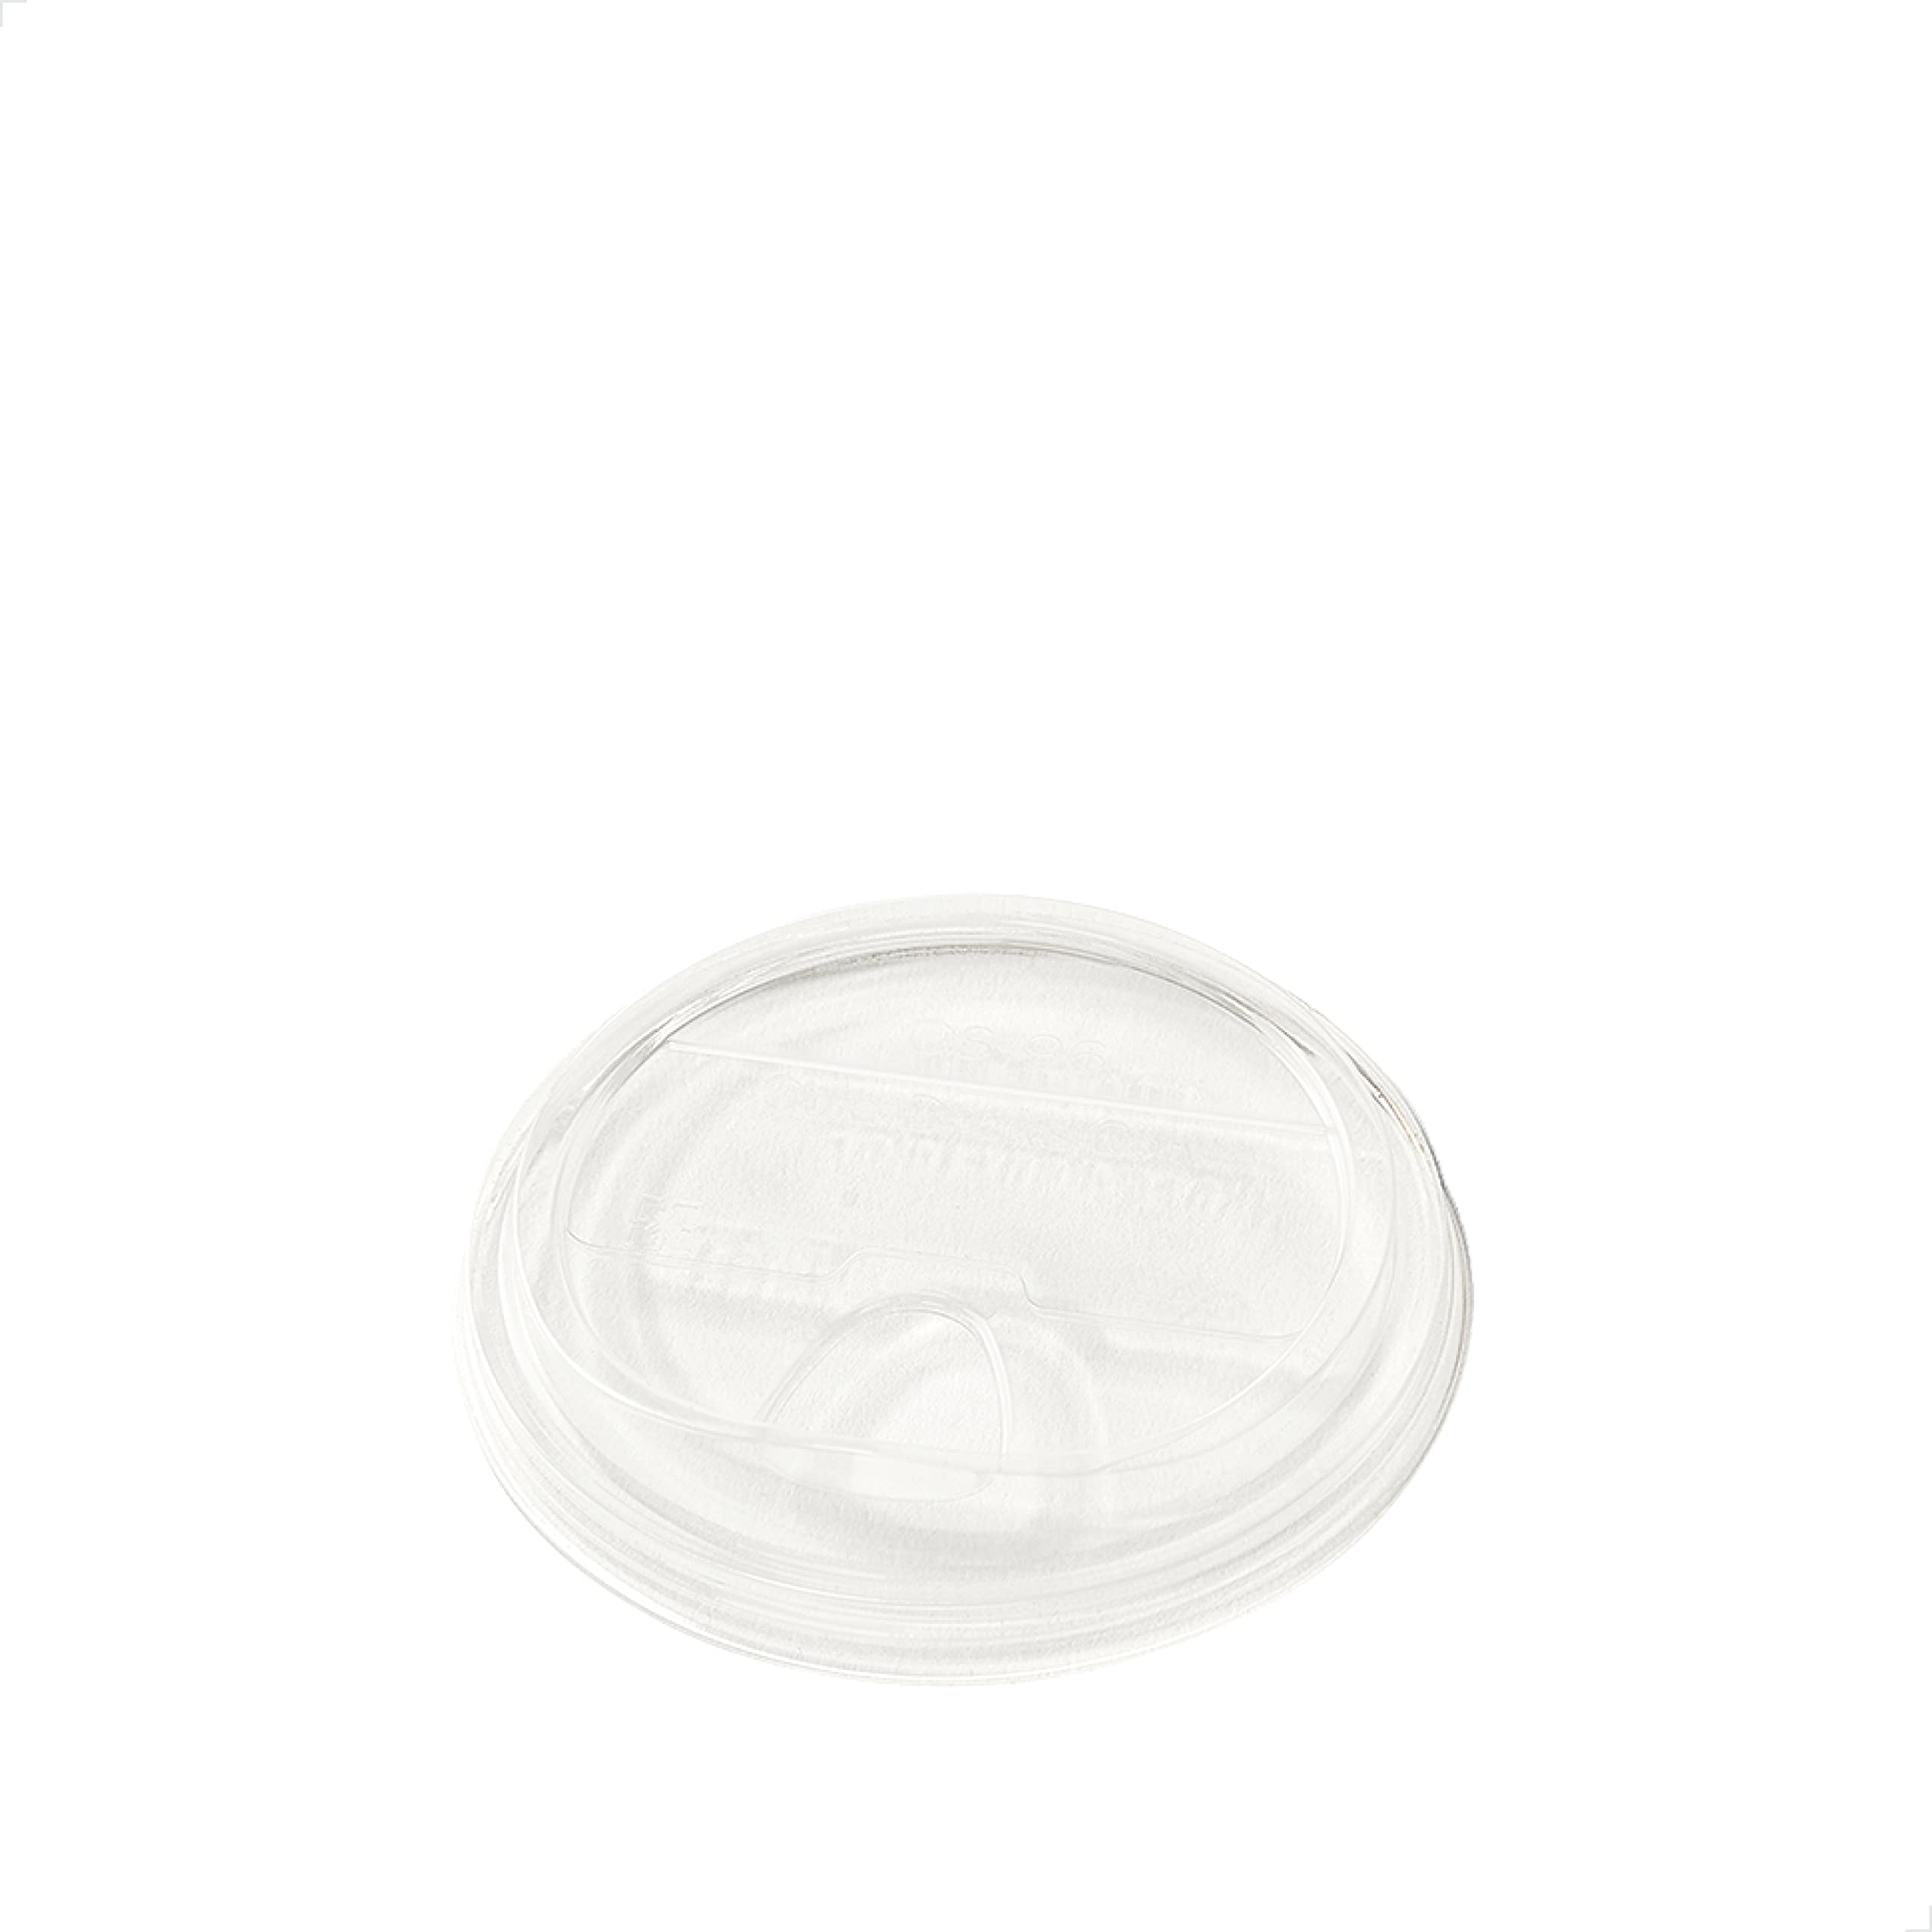 TOSSWARE NATURAL Flat Sip Lid Set of 50 - Plant Based Lids for Cold Cups - Plastic Alternative Straw Lids - Clear Flat Lids - Fits 10, 12, 16, 20 & 24oz Cups